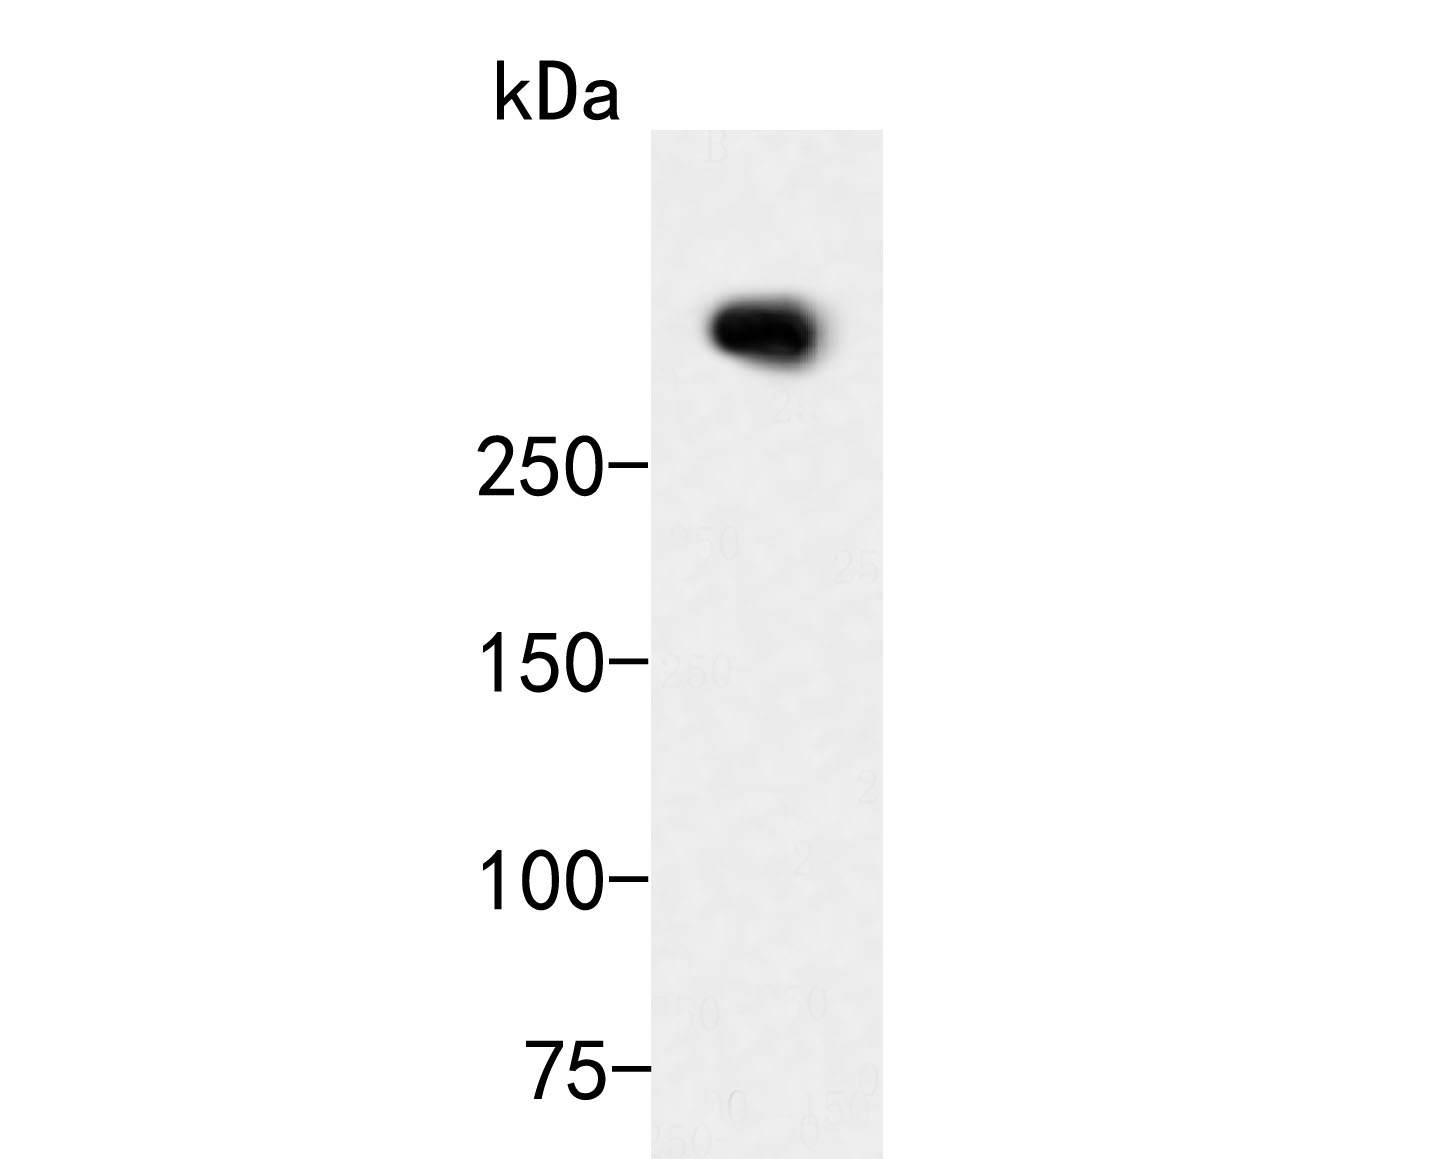 Western blot analysis of ATBF1 on MCF-7 cell  lysates. Proteins were transferred to a PVDF membrane and blocked with 5% BSA in PBS for 1 hour at room temperature. The primary antibody (ER2001-49, 1/500) was used in 5% BSA at room temperature for 2 hours. Goat Anti-Rabbit IgG - HRP Secondary Antibody (HA1001) at 1:5,000 dilution was used for 1 hour at room temperature.